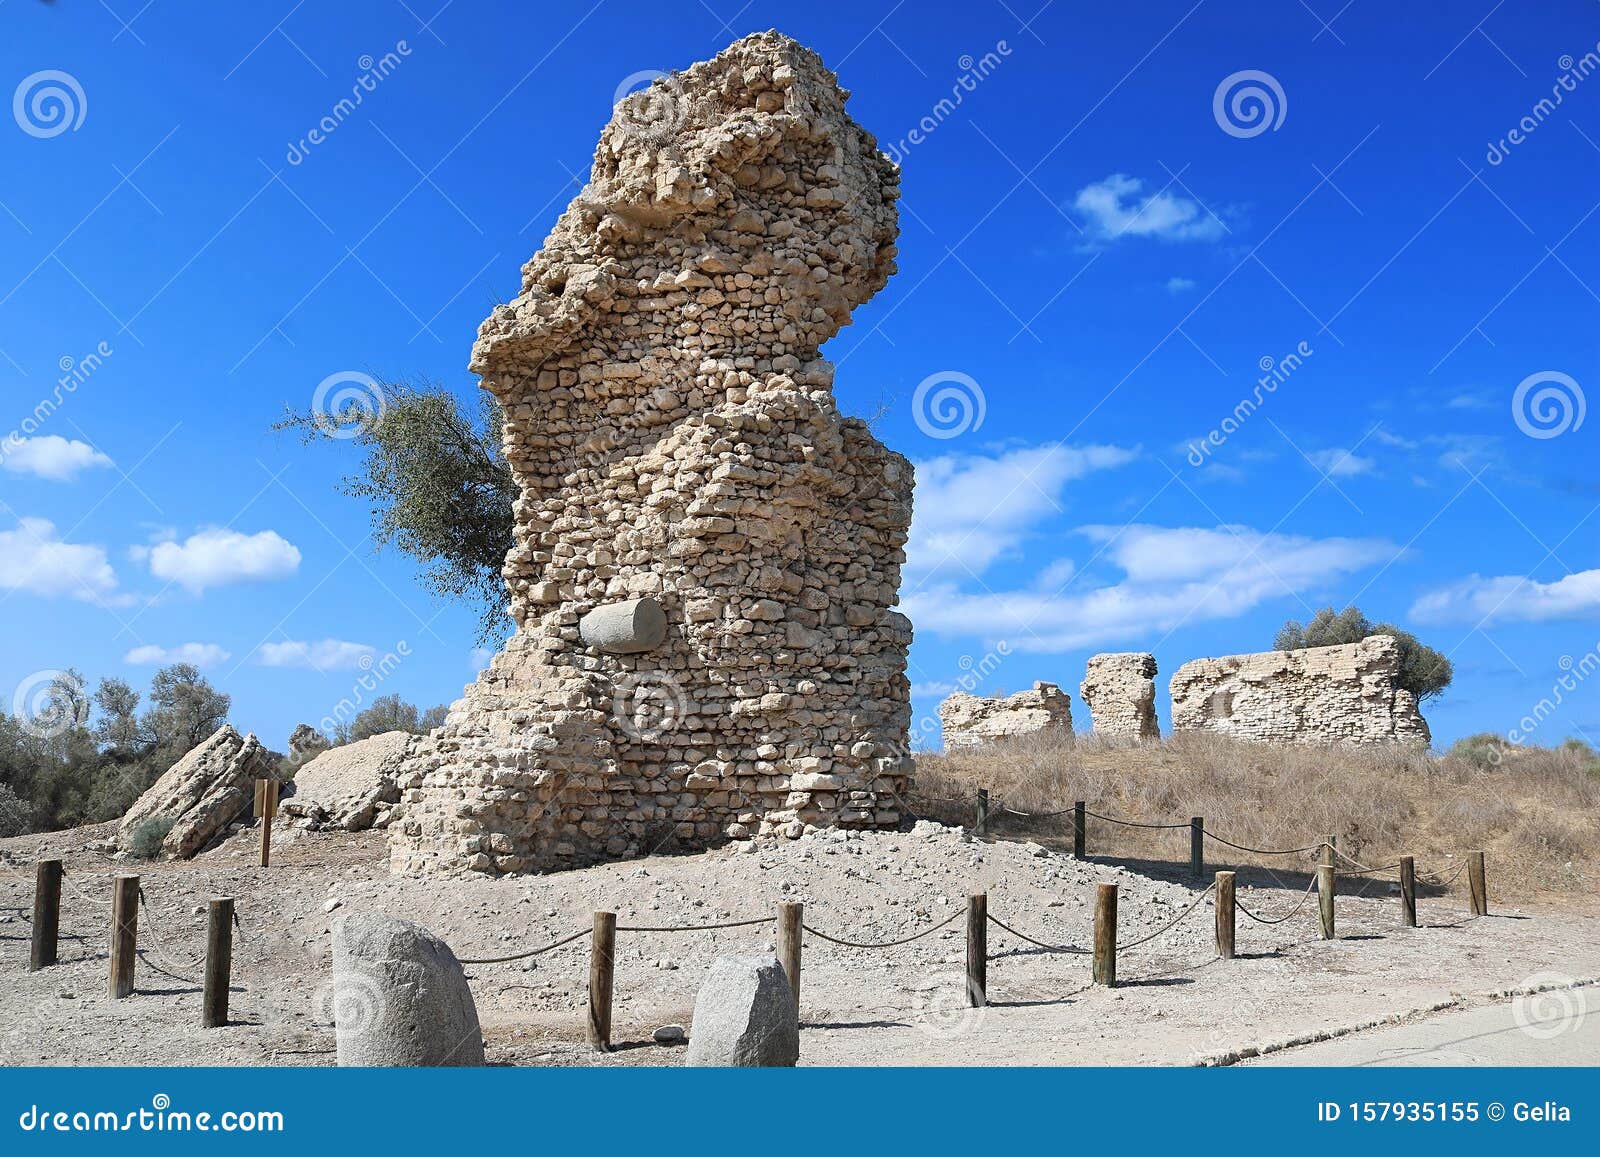 Ruins Of The Tower In The Park Ashkelon Israel Stock Image Image Of Religion Building 157935155